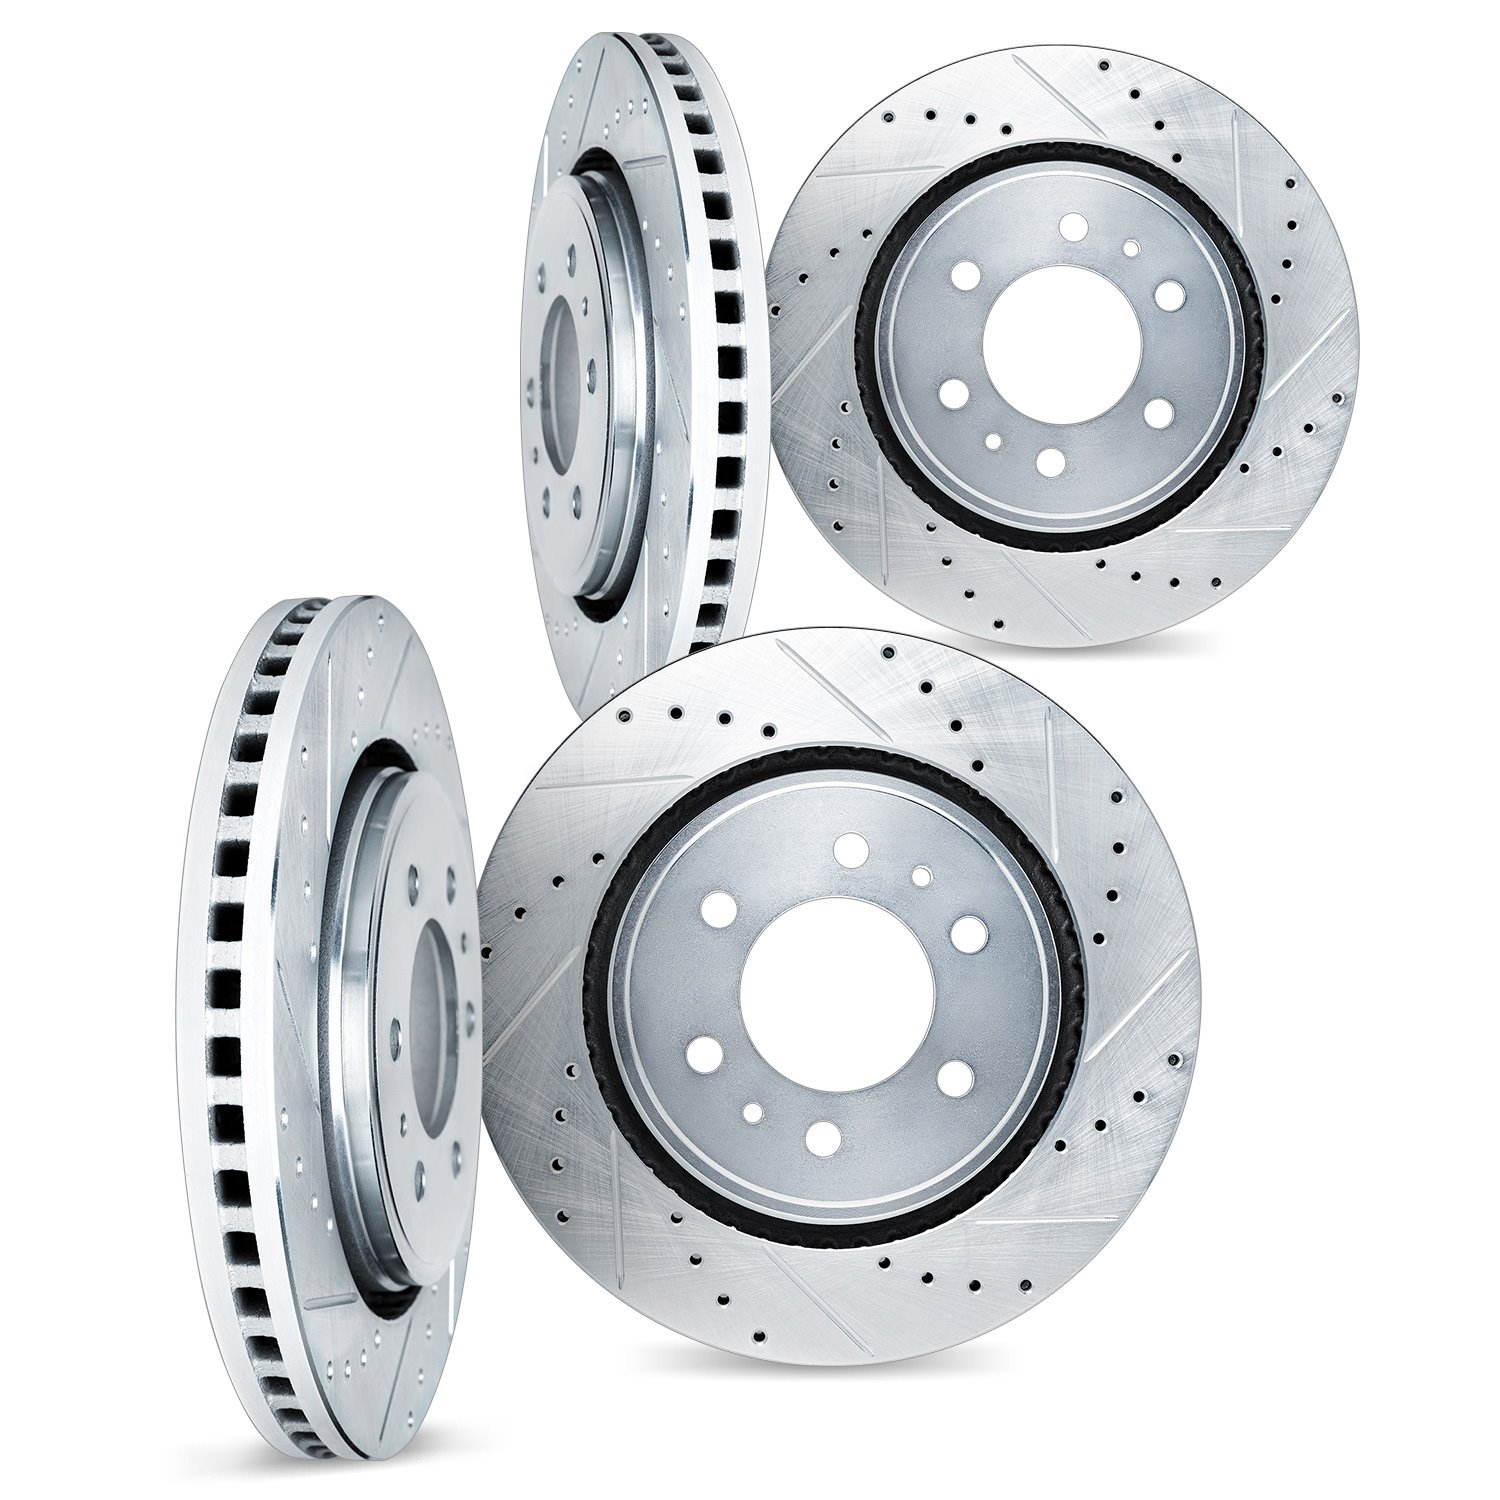 7004-40129 Drilled/Slotted Brake Rotors [Silver], Fits Select Mopar, Position: Front and Rear